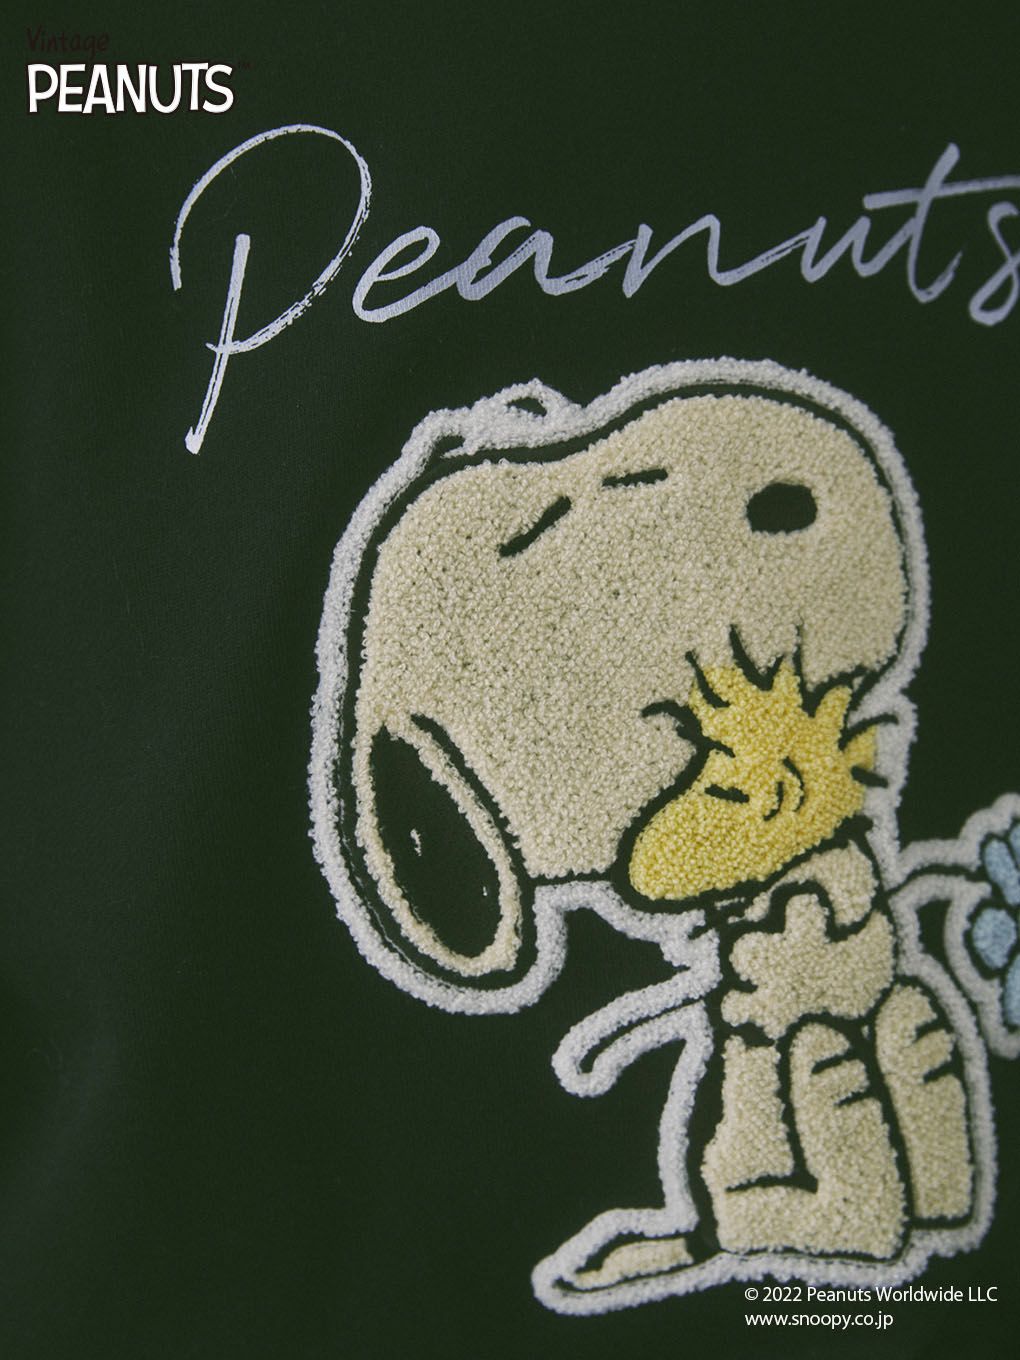 【SNOOPY】SNOOPY & WOODSTOCK PILE EMBROIDERY SWEAT SHIRT